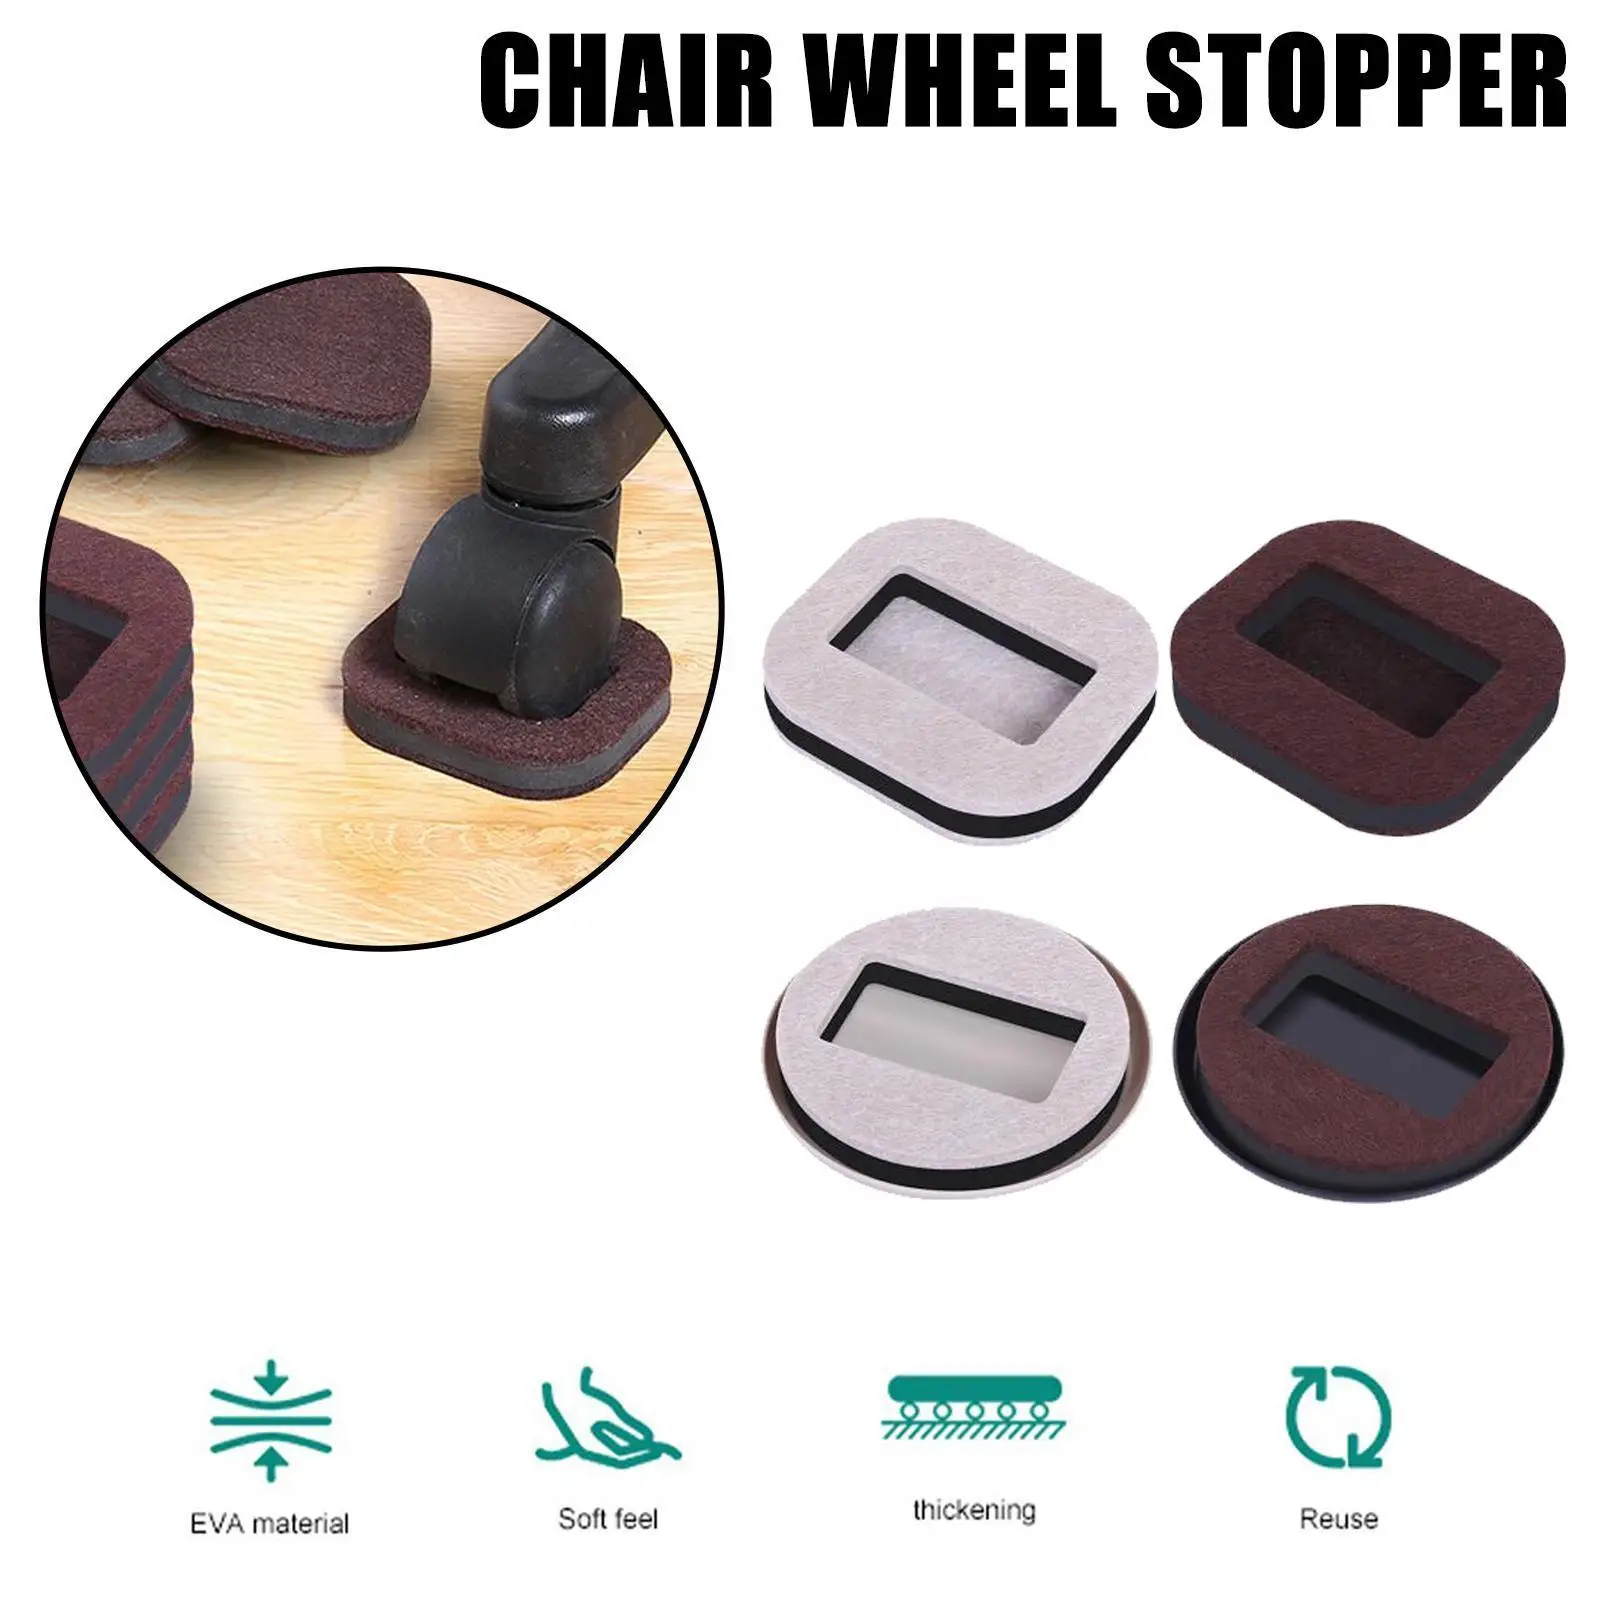 

5pcs Office Chair Wheel Stopper Chair Fixing Shockproof Scratches Stopper Carpet Caster Pad Prevents Furniture Floor Wheel L8R4